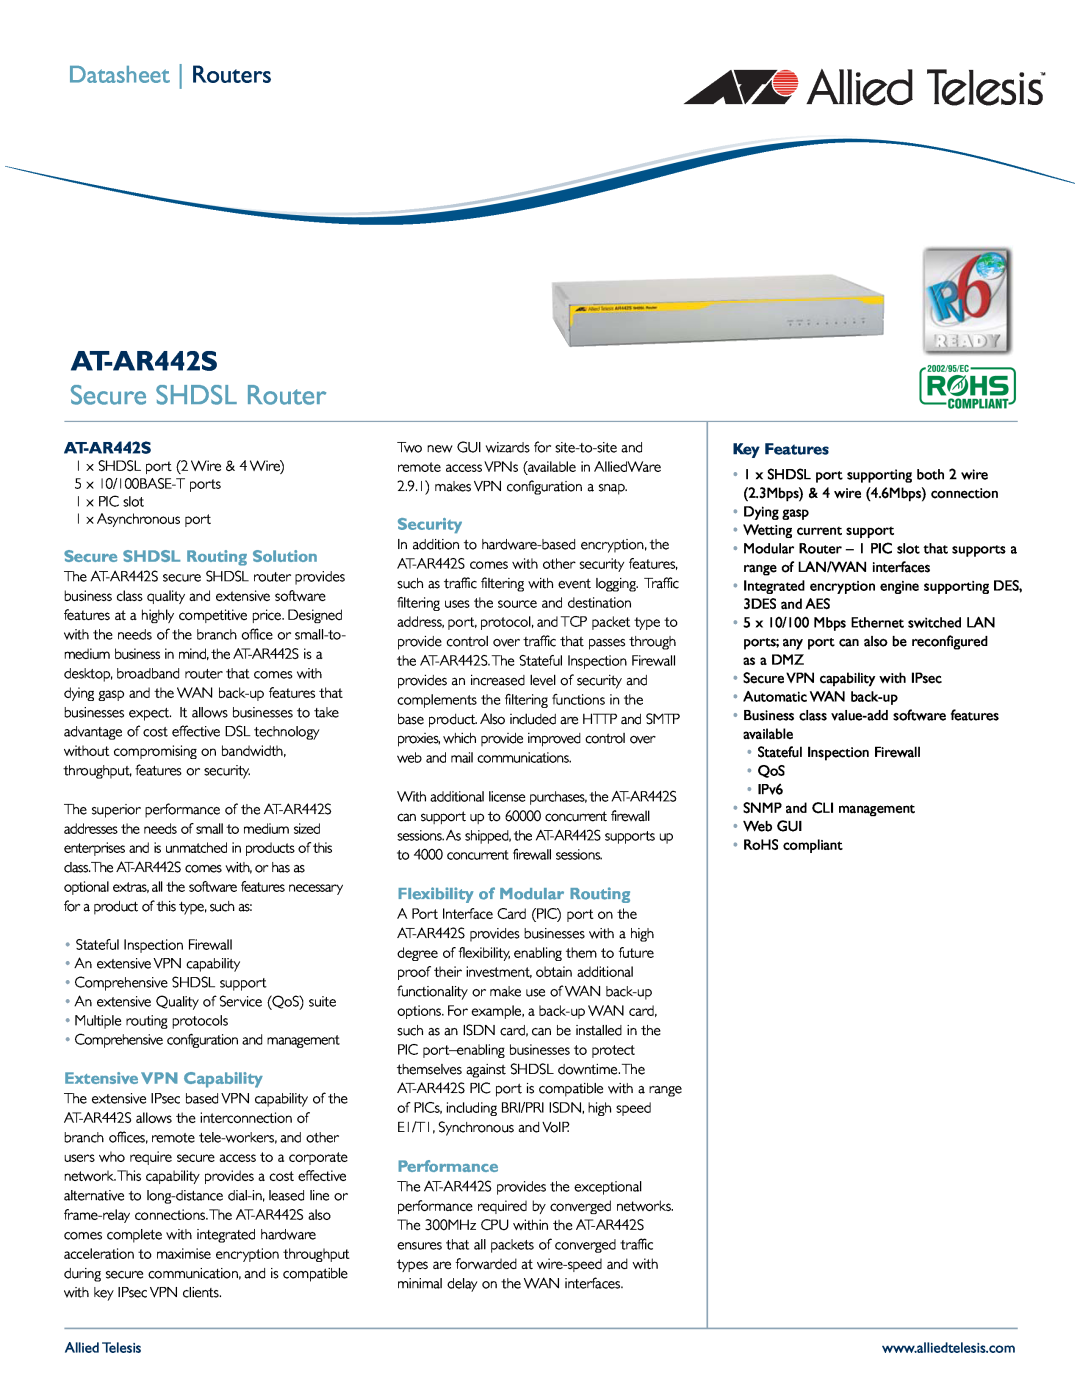 Allied Telesis AT-AR442S manual Secure SHDSL Router, Datasheet Routers, Key Features 